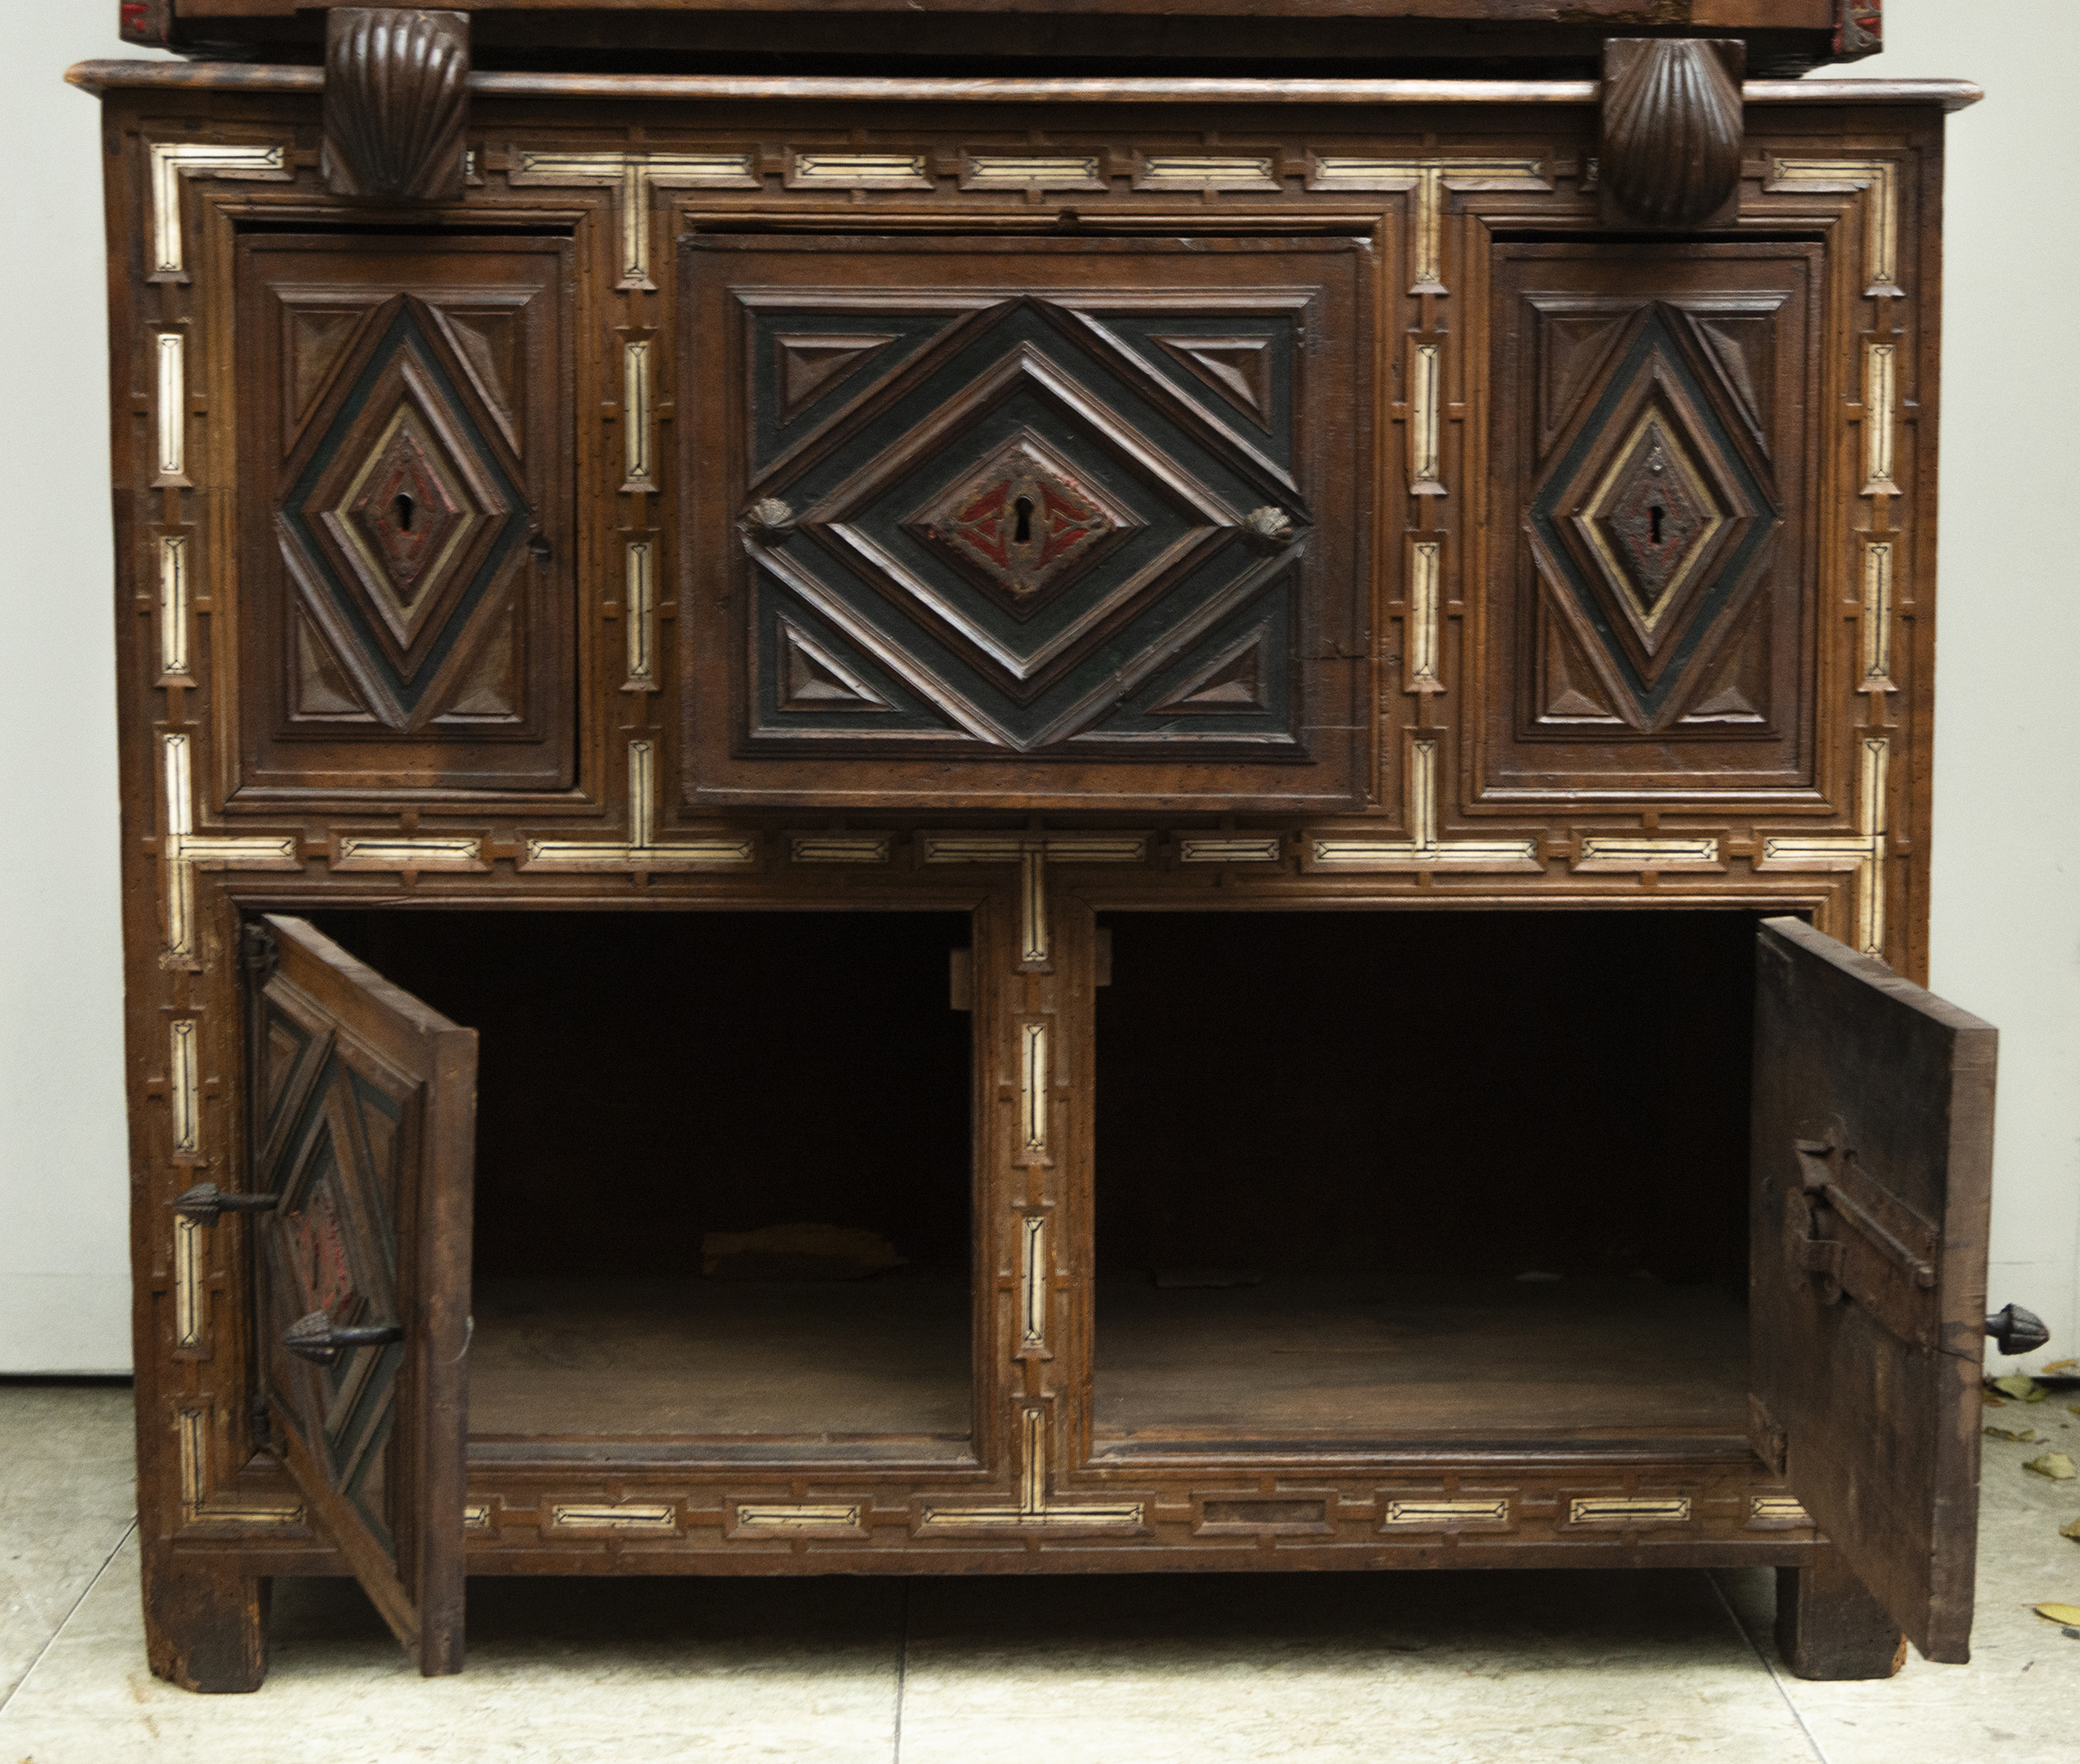 Renaissance Vargas "Bargueño" type chest cabinet with period table, 16th century - Image 7 of 8